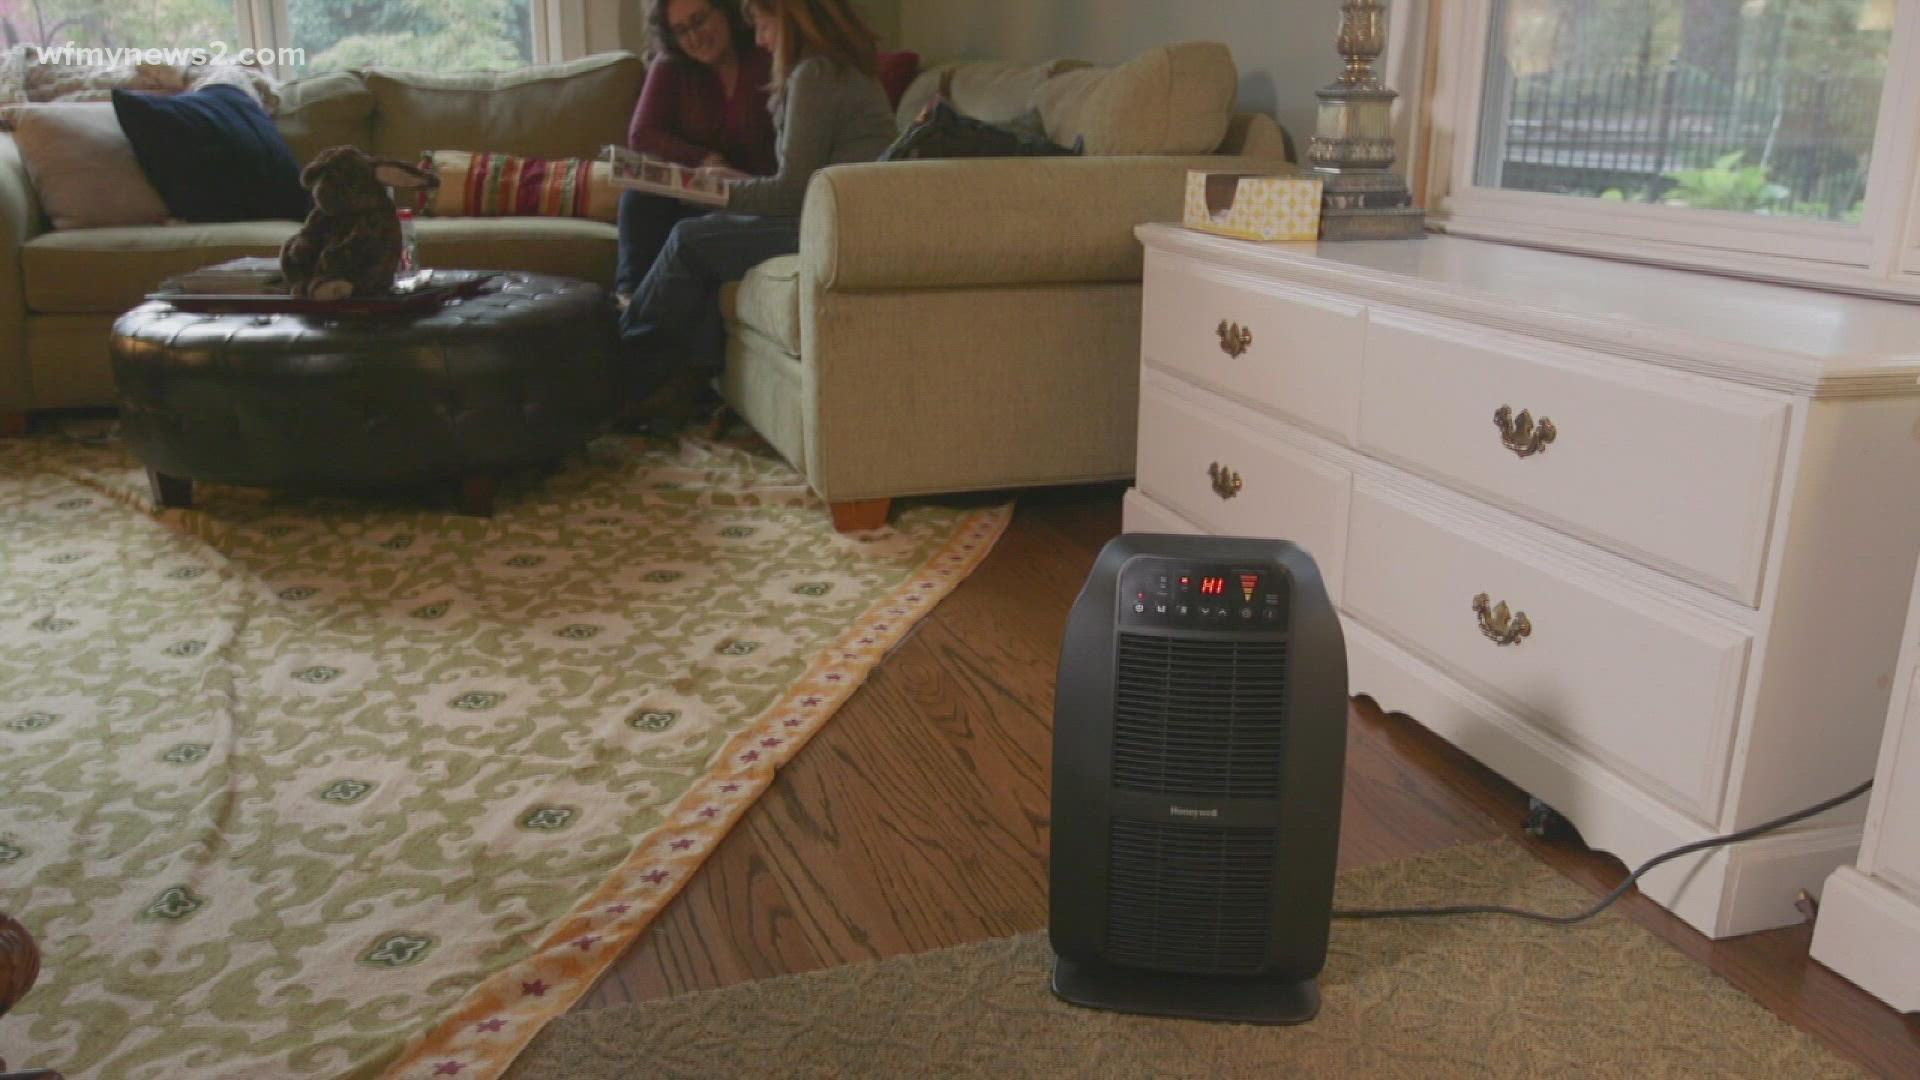 Statistics show space heaters are involved in one-third of all home heating fires.